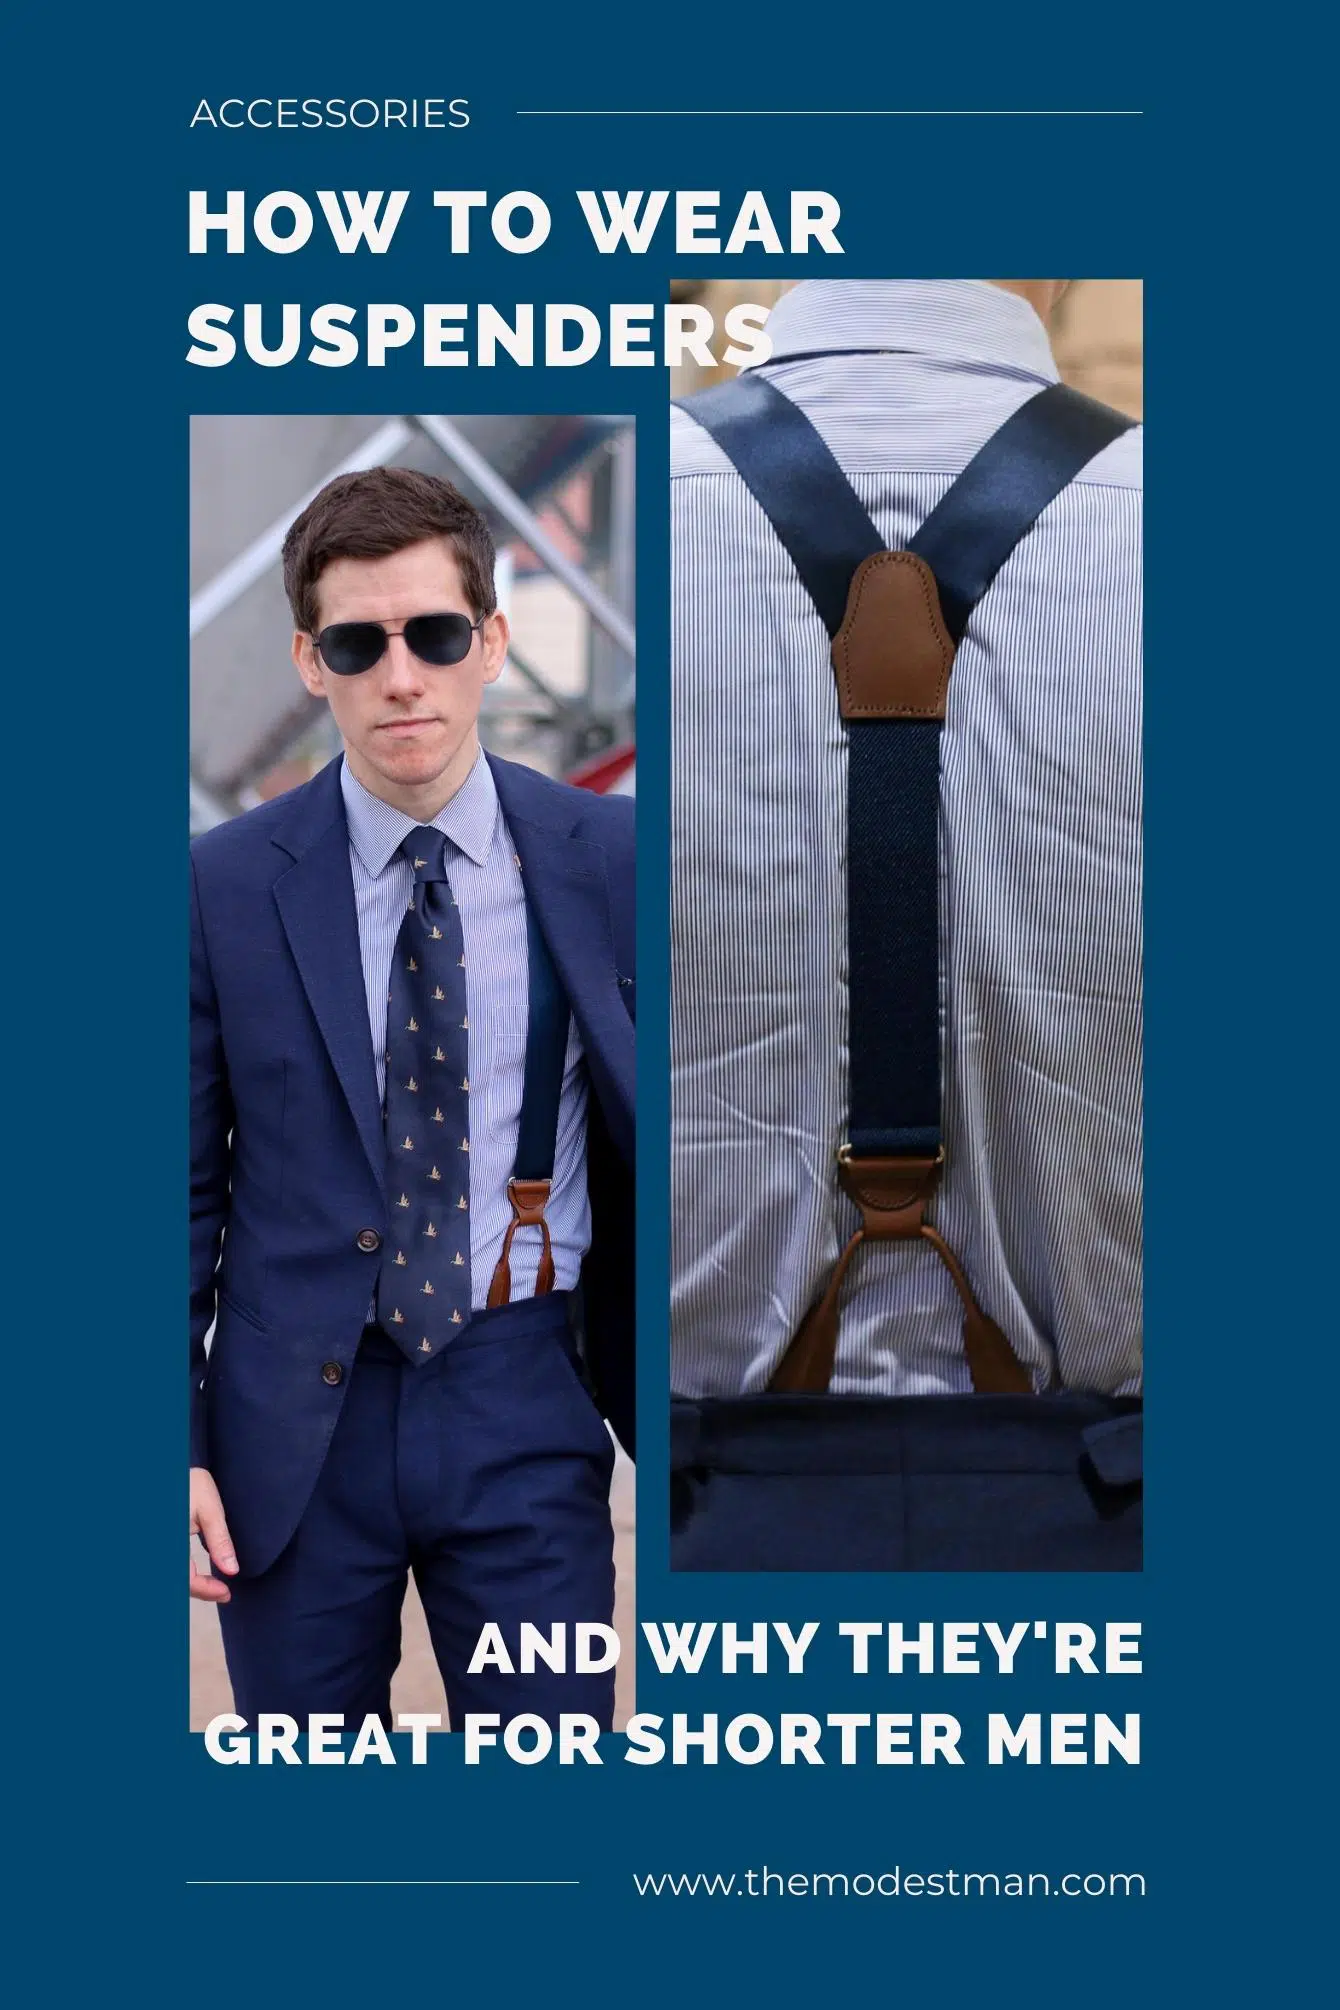 Guide on How to Wear Suspenders